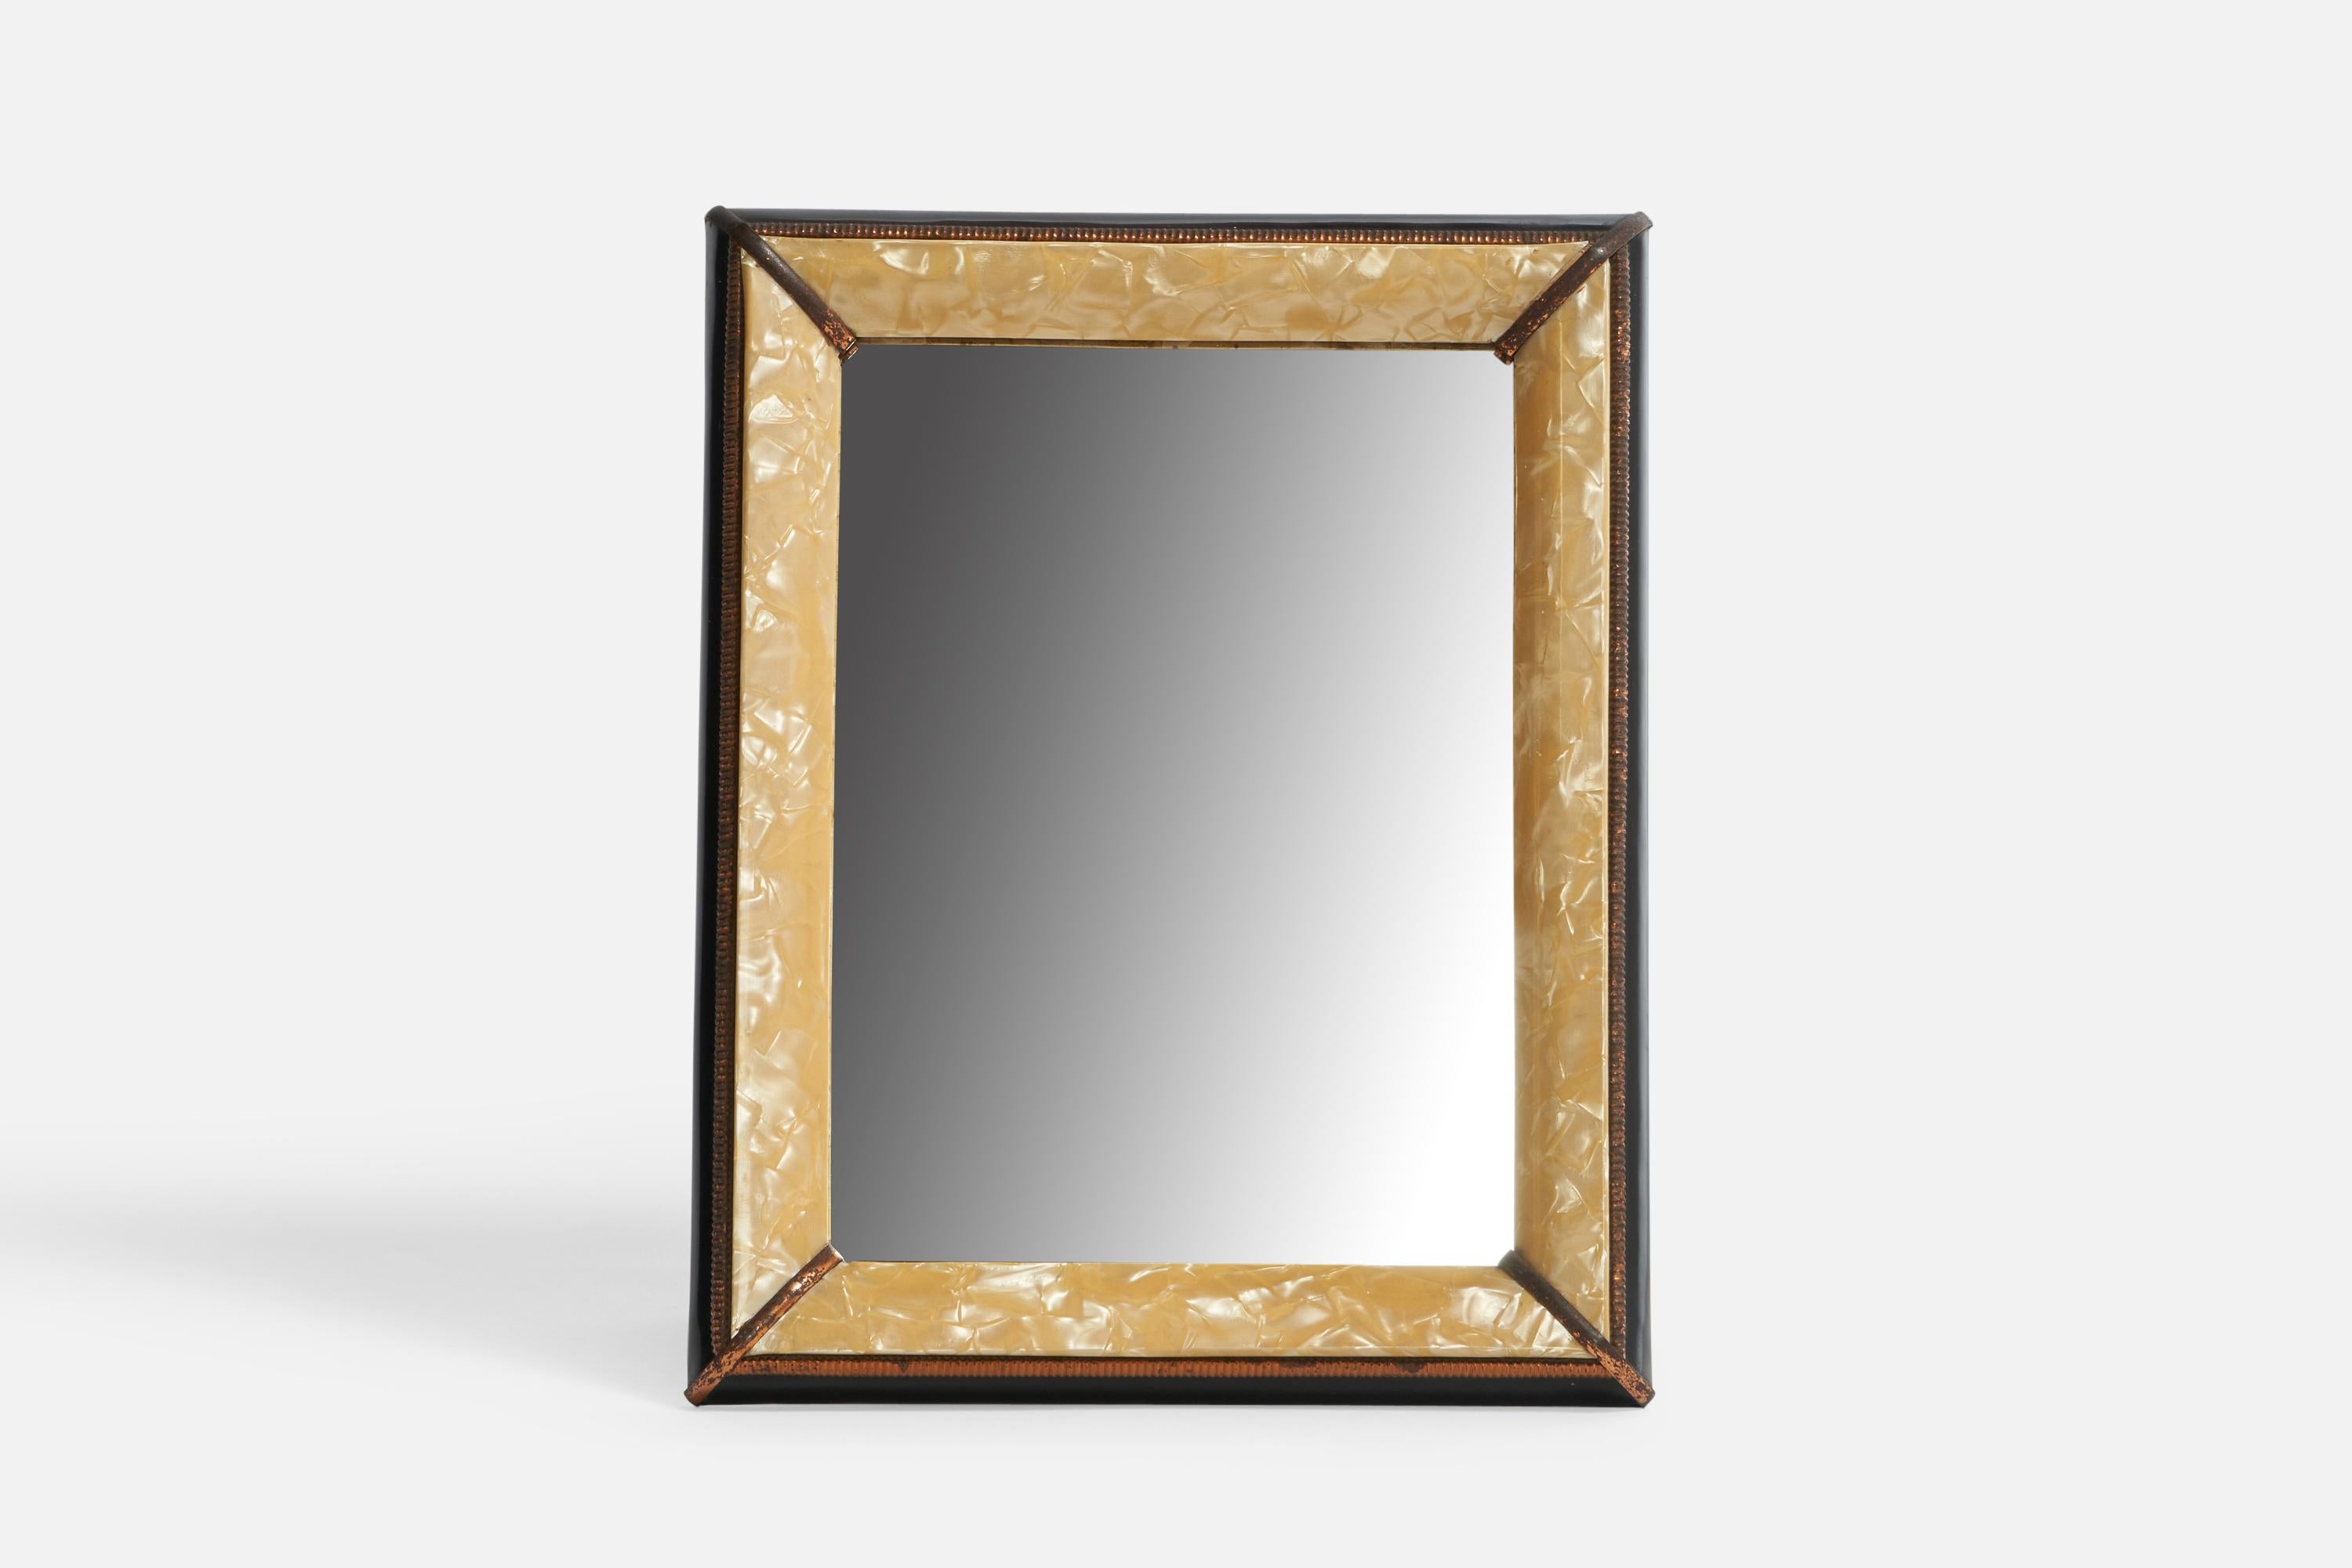 A copper and mother of pearl imitation table mirror designed and produced in Italy, 1940s.